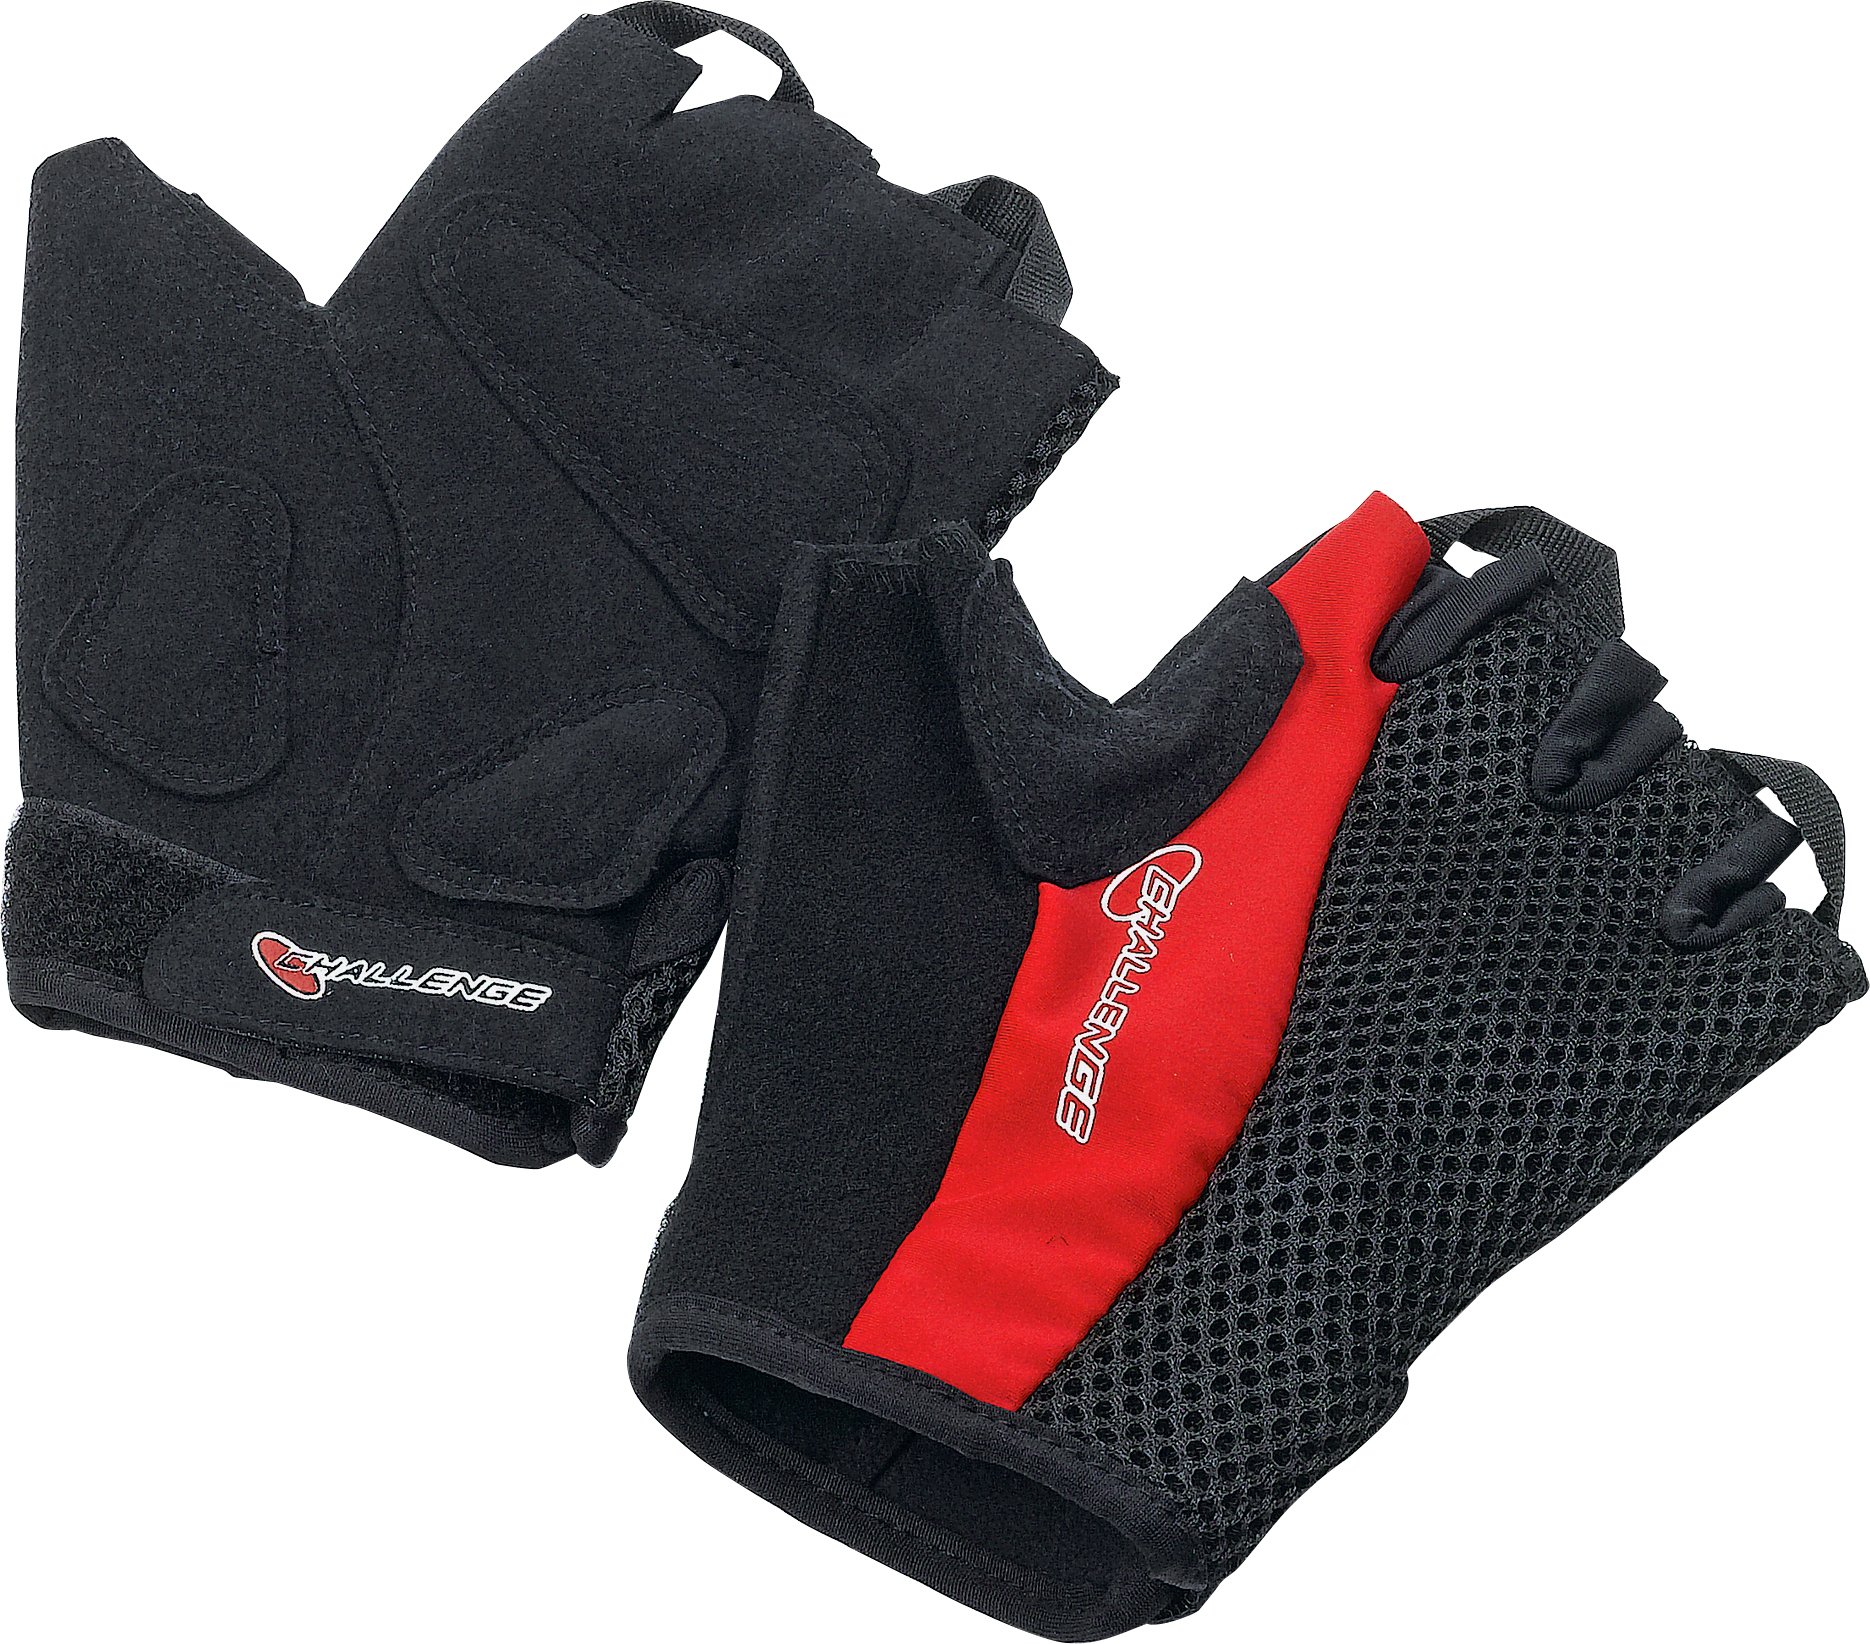 Challenge Fingerless Cycle Gloves